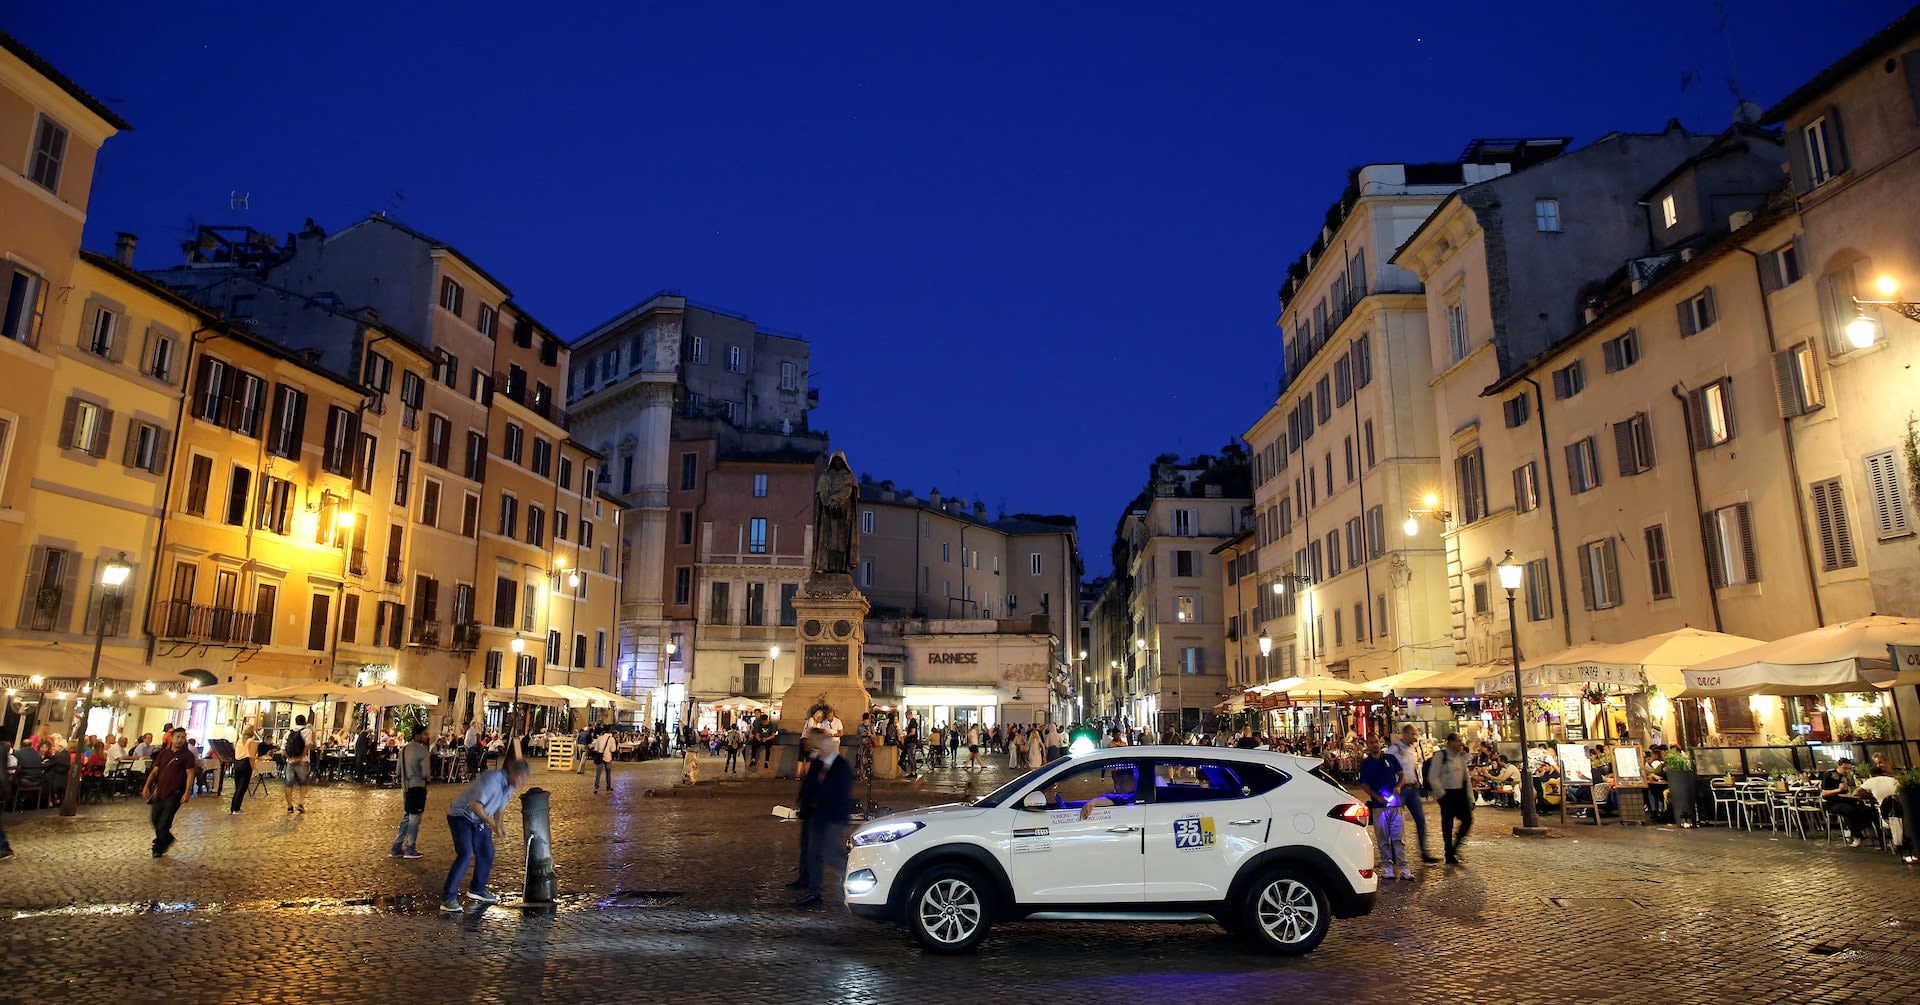 Rome poised to end taxi drought, mayor says